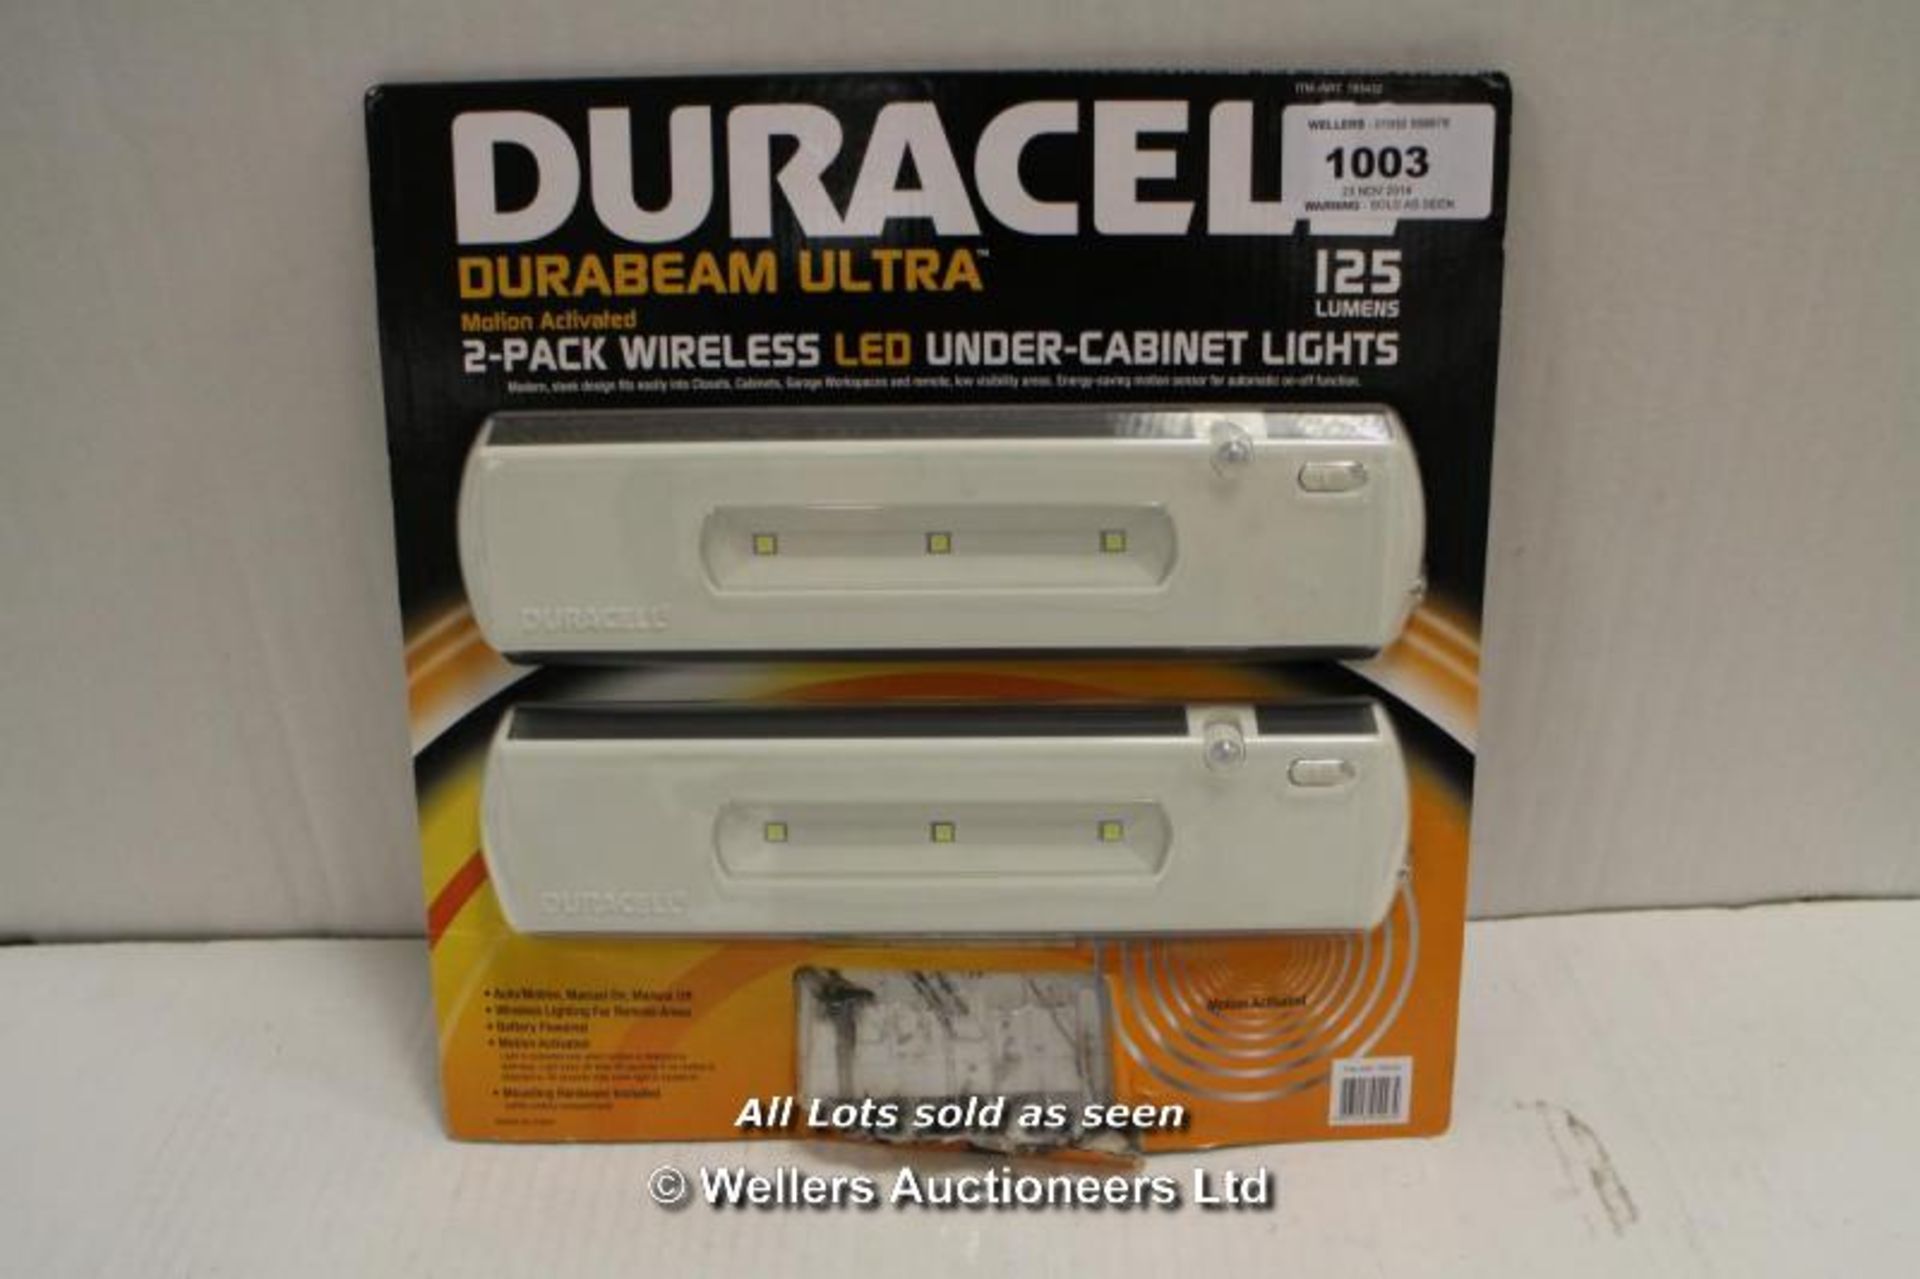 *1 PACK OF DURACELL WIRELESS UNDER-CABINET LIGHTS.